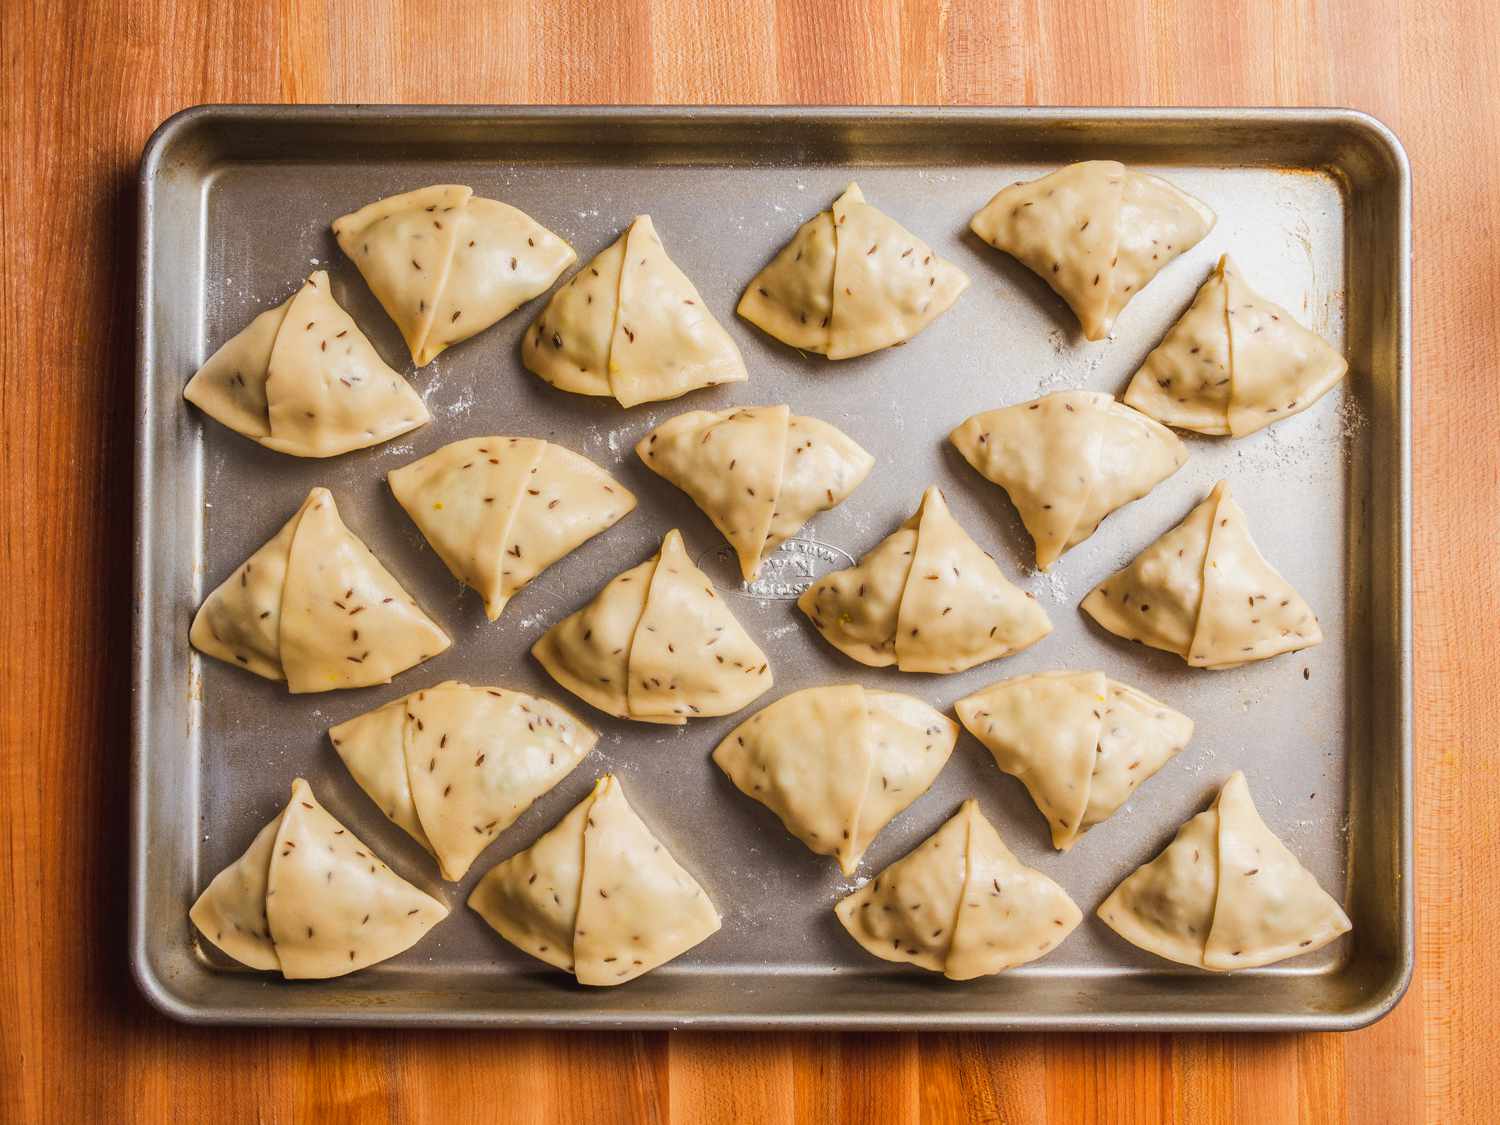 Wrapped samosas on a lightly floured baking sheet, ready for frying